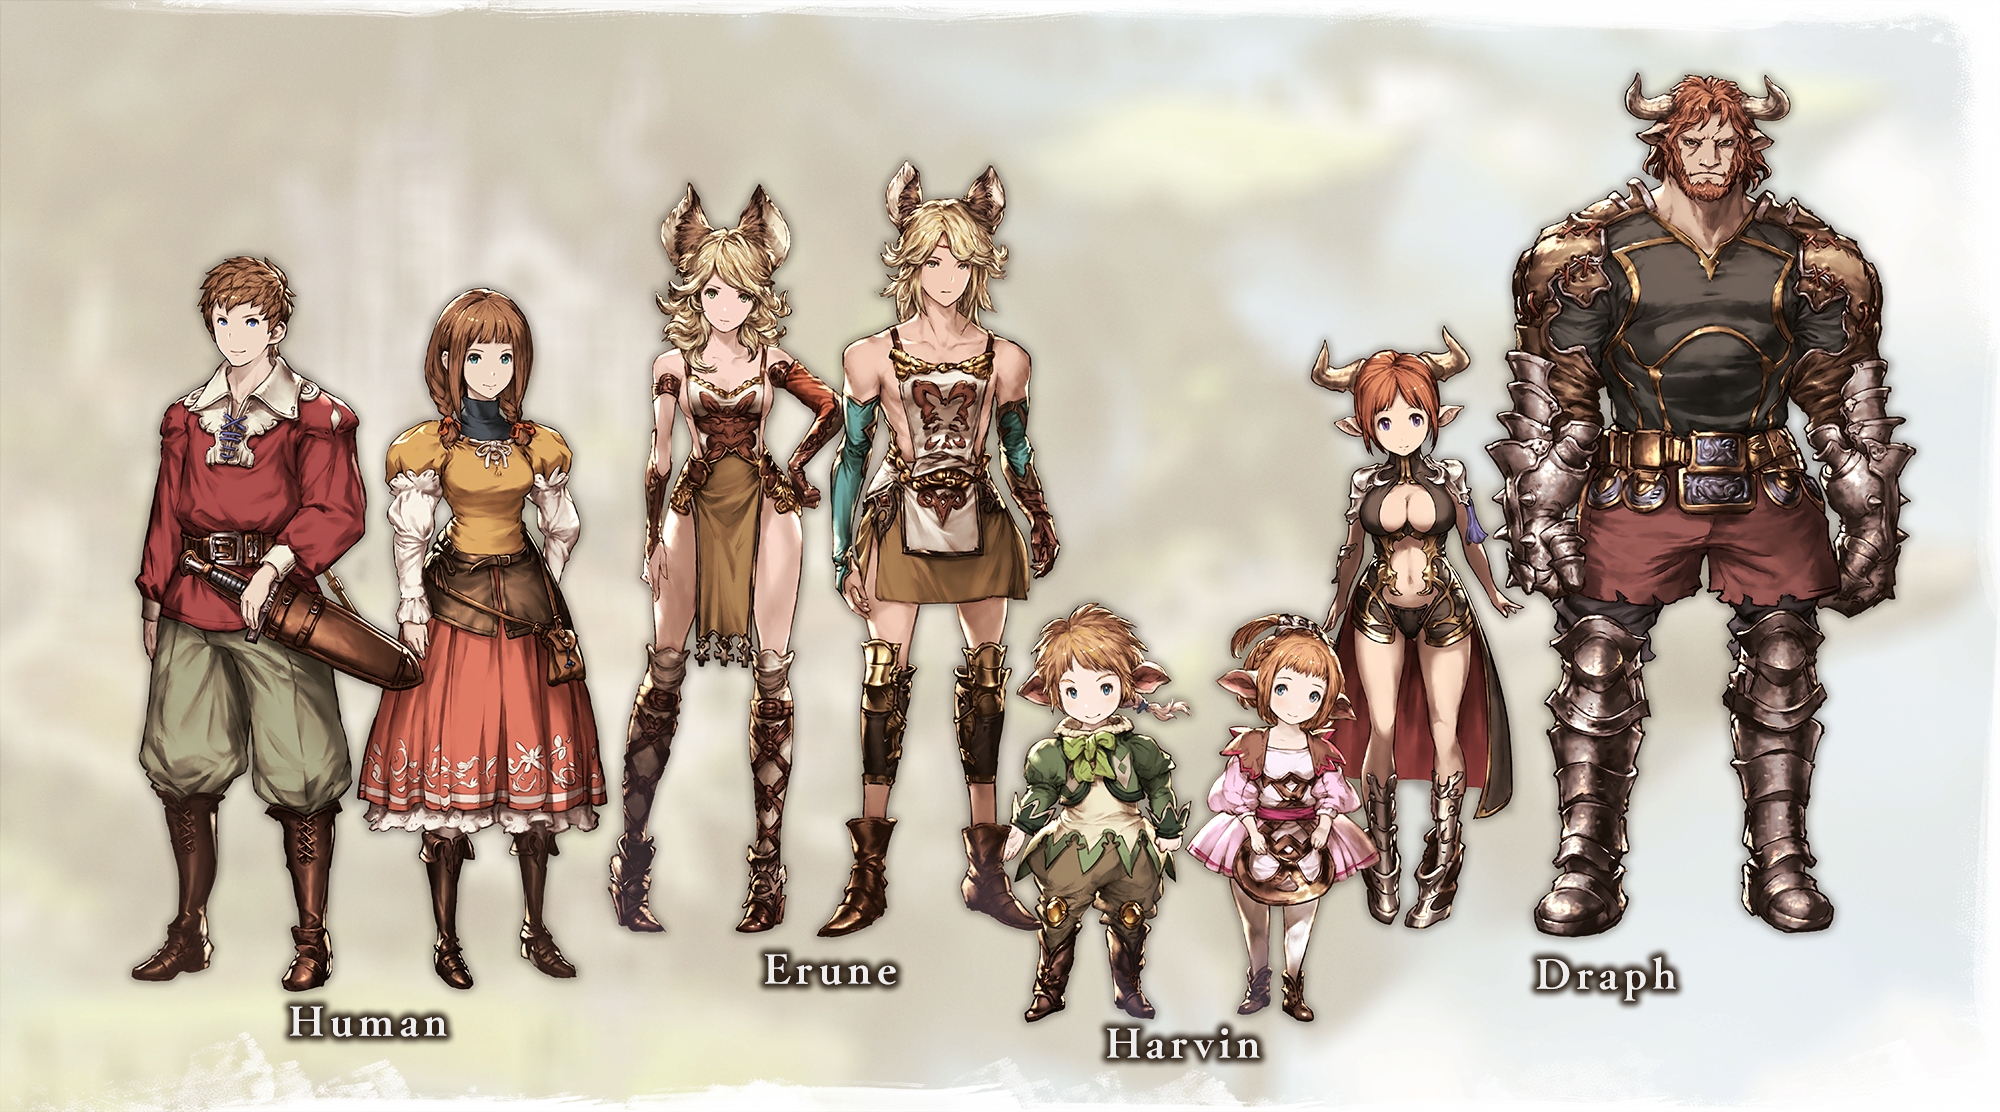 What is Granblue Fantasy? Everything you need to know about the popular  gacha JRPG